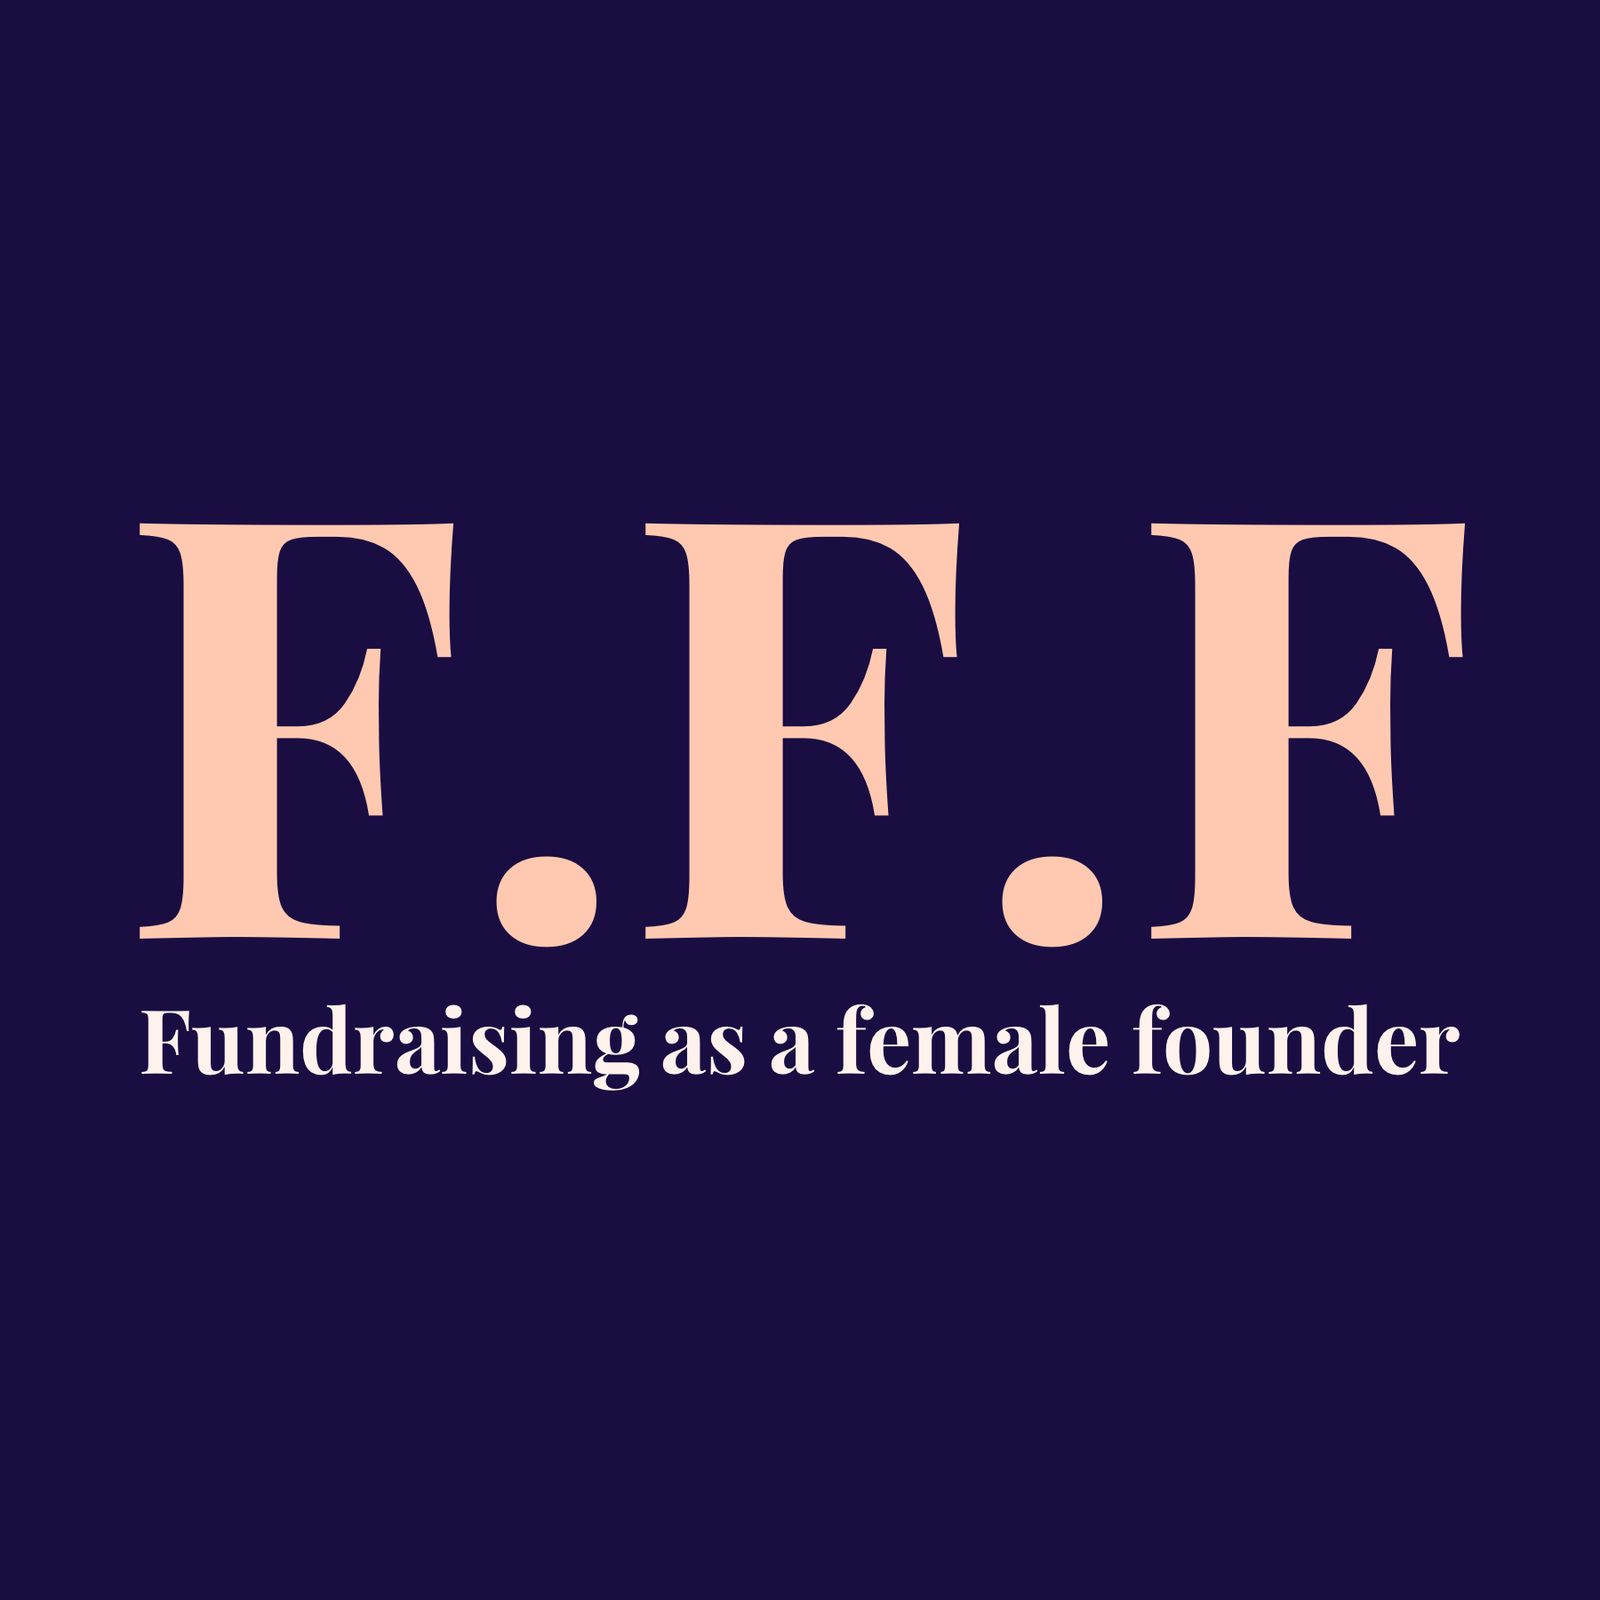 Fundraising as a Female Founder